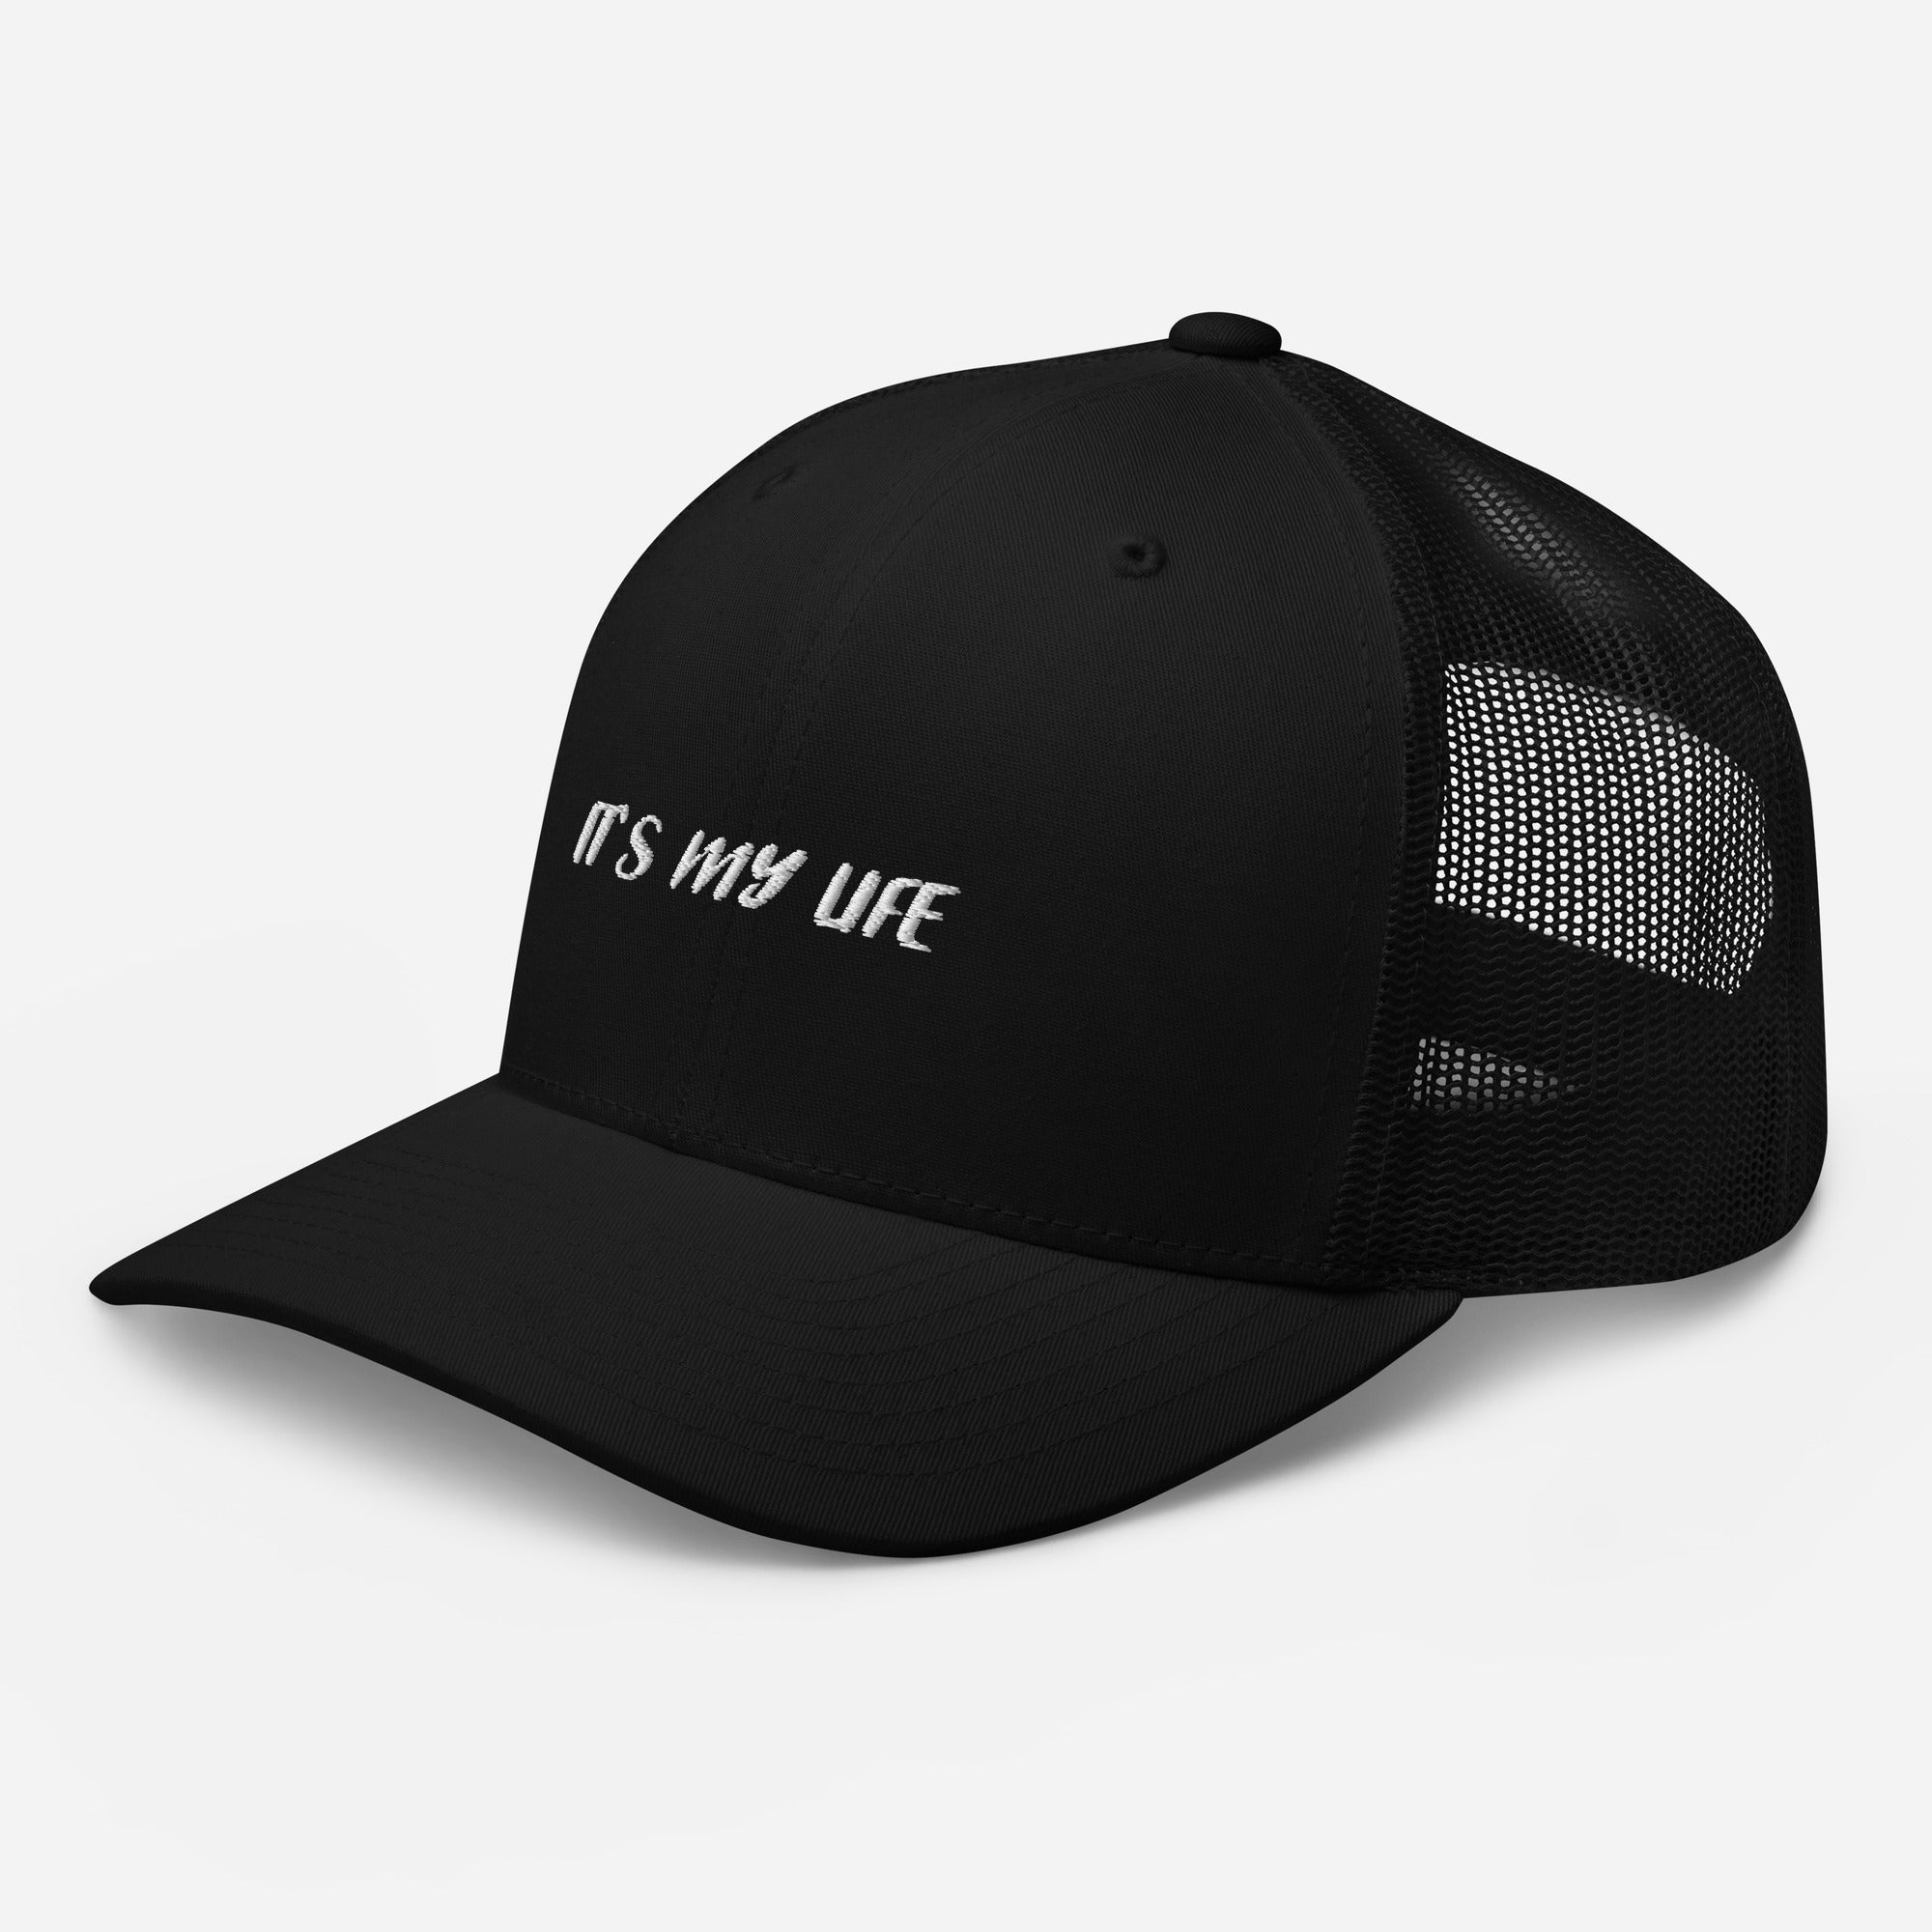 Maily B "It's my life" embroidered trucker cap